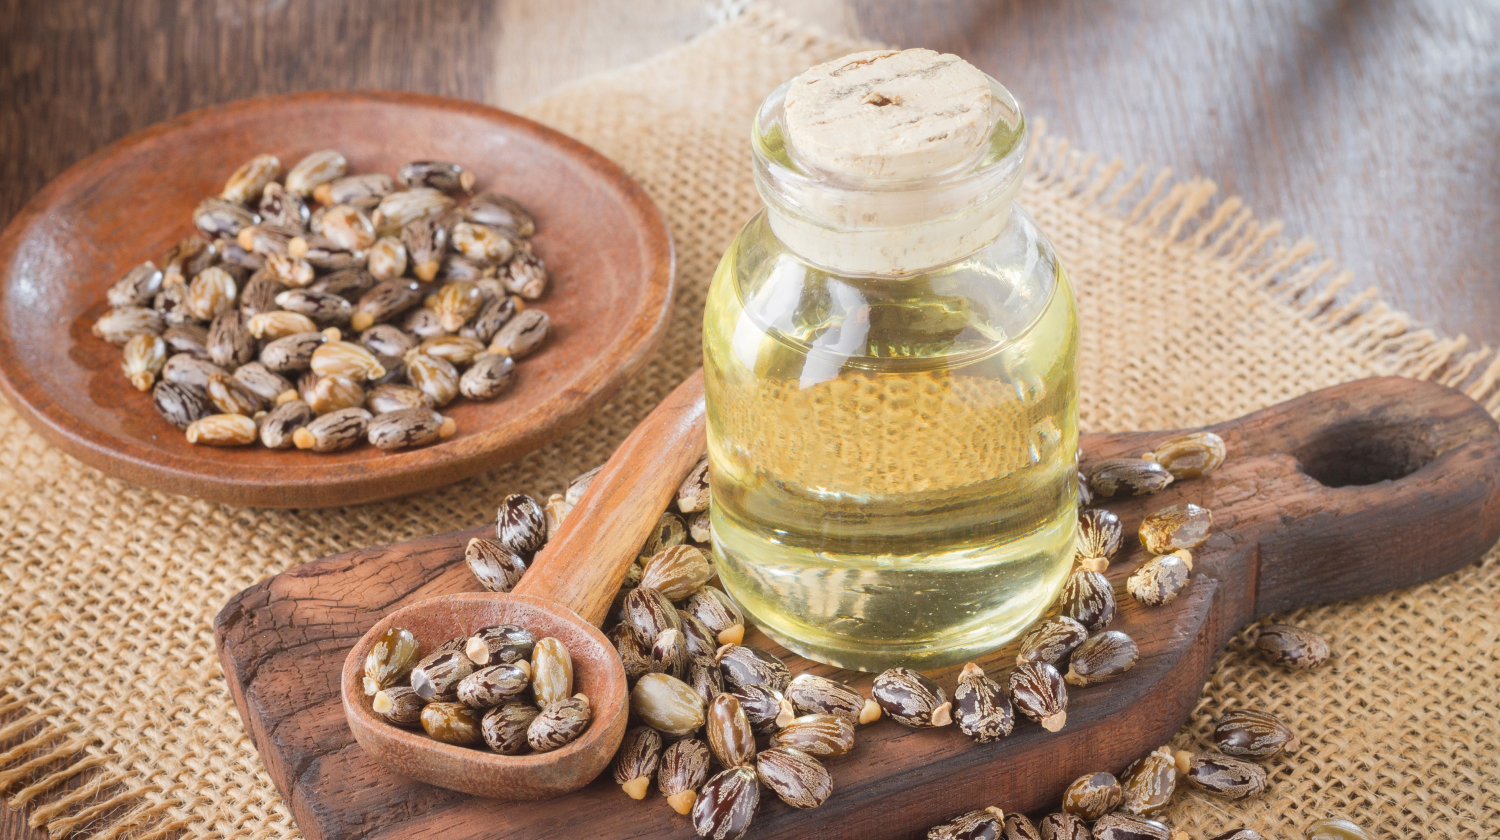 Castor Oil For Hair Growth: Benefits, Uses & Side Effects 2023